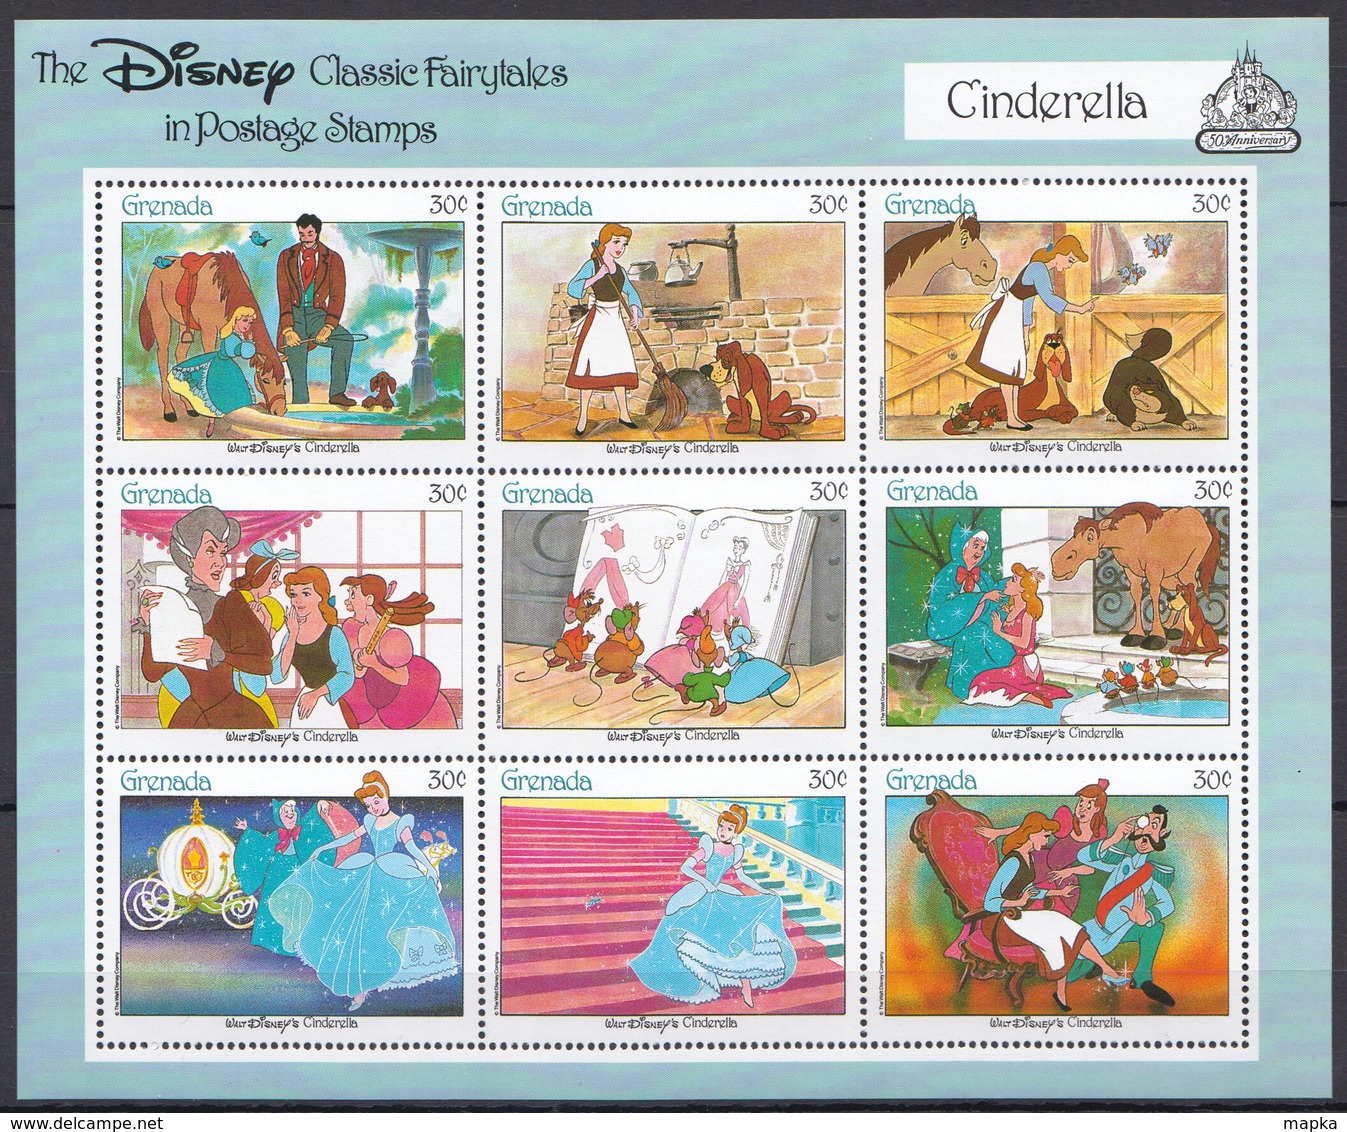 D312 GRENADA THE DISNEY CLASSIC FAIRYTALES IN POSTAGE STAMPS CINDERELLA 1KB MNH - Disney